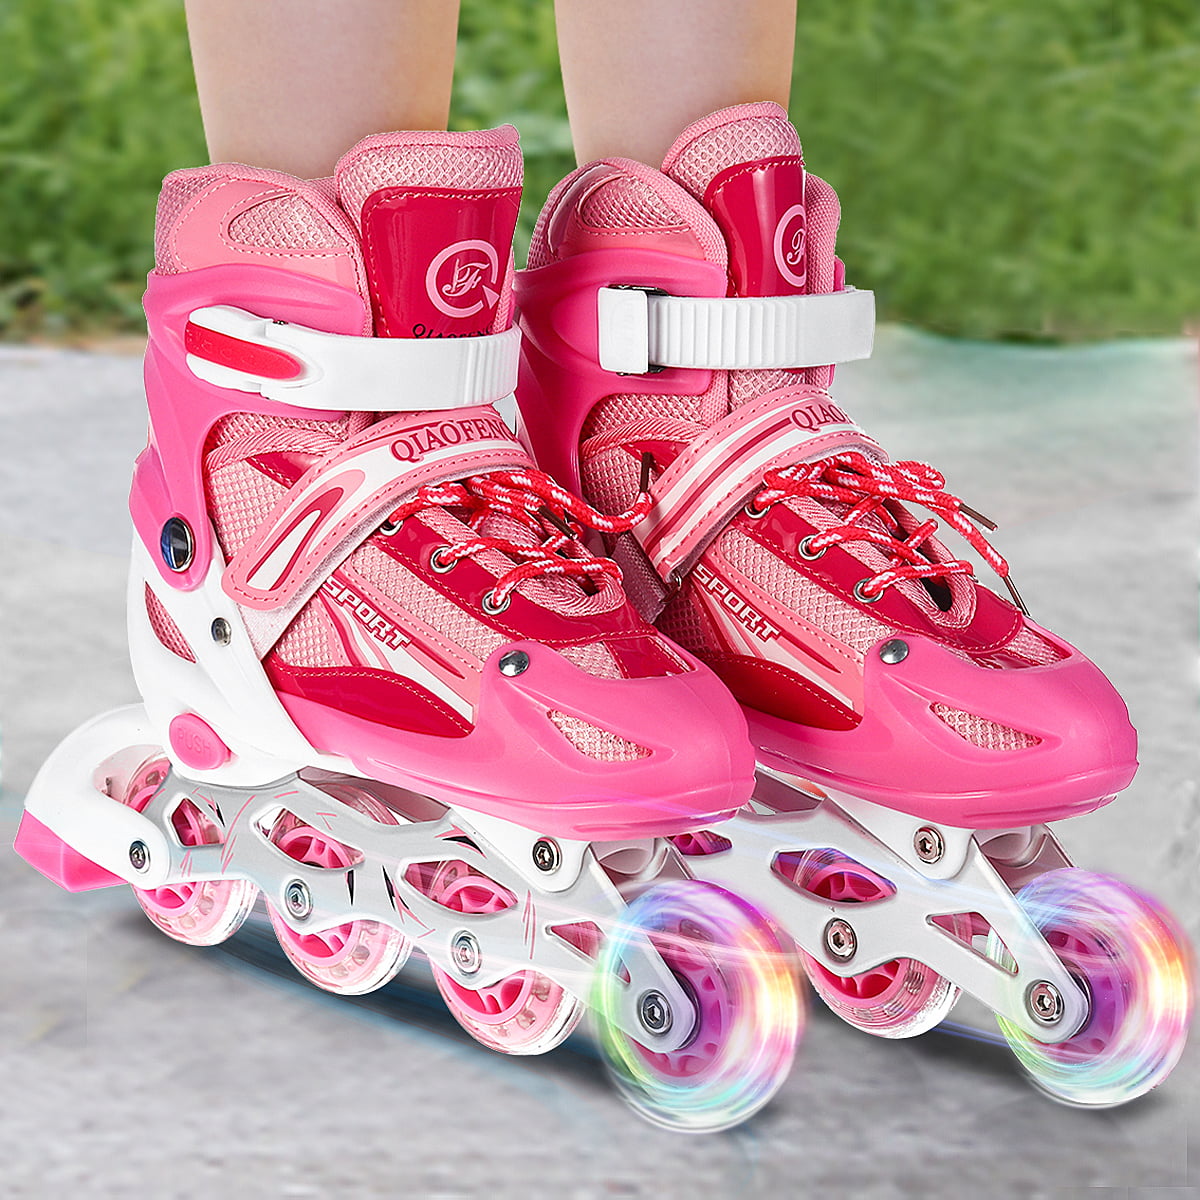 Adjustable Inline Skates Ice Skates Combo Pack Gift Boxed for Kids Size from 13.5 Junior to 9 Adult 